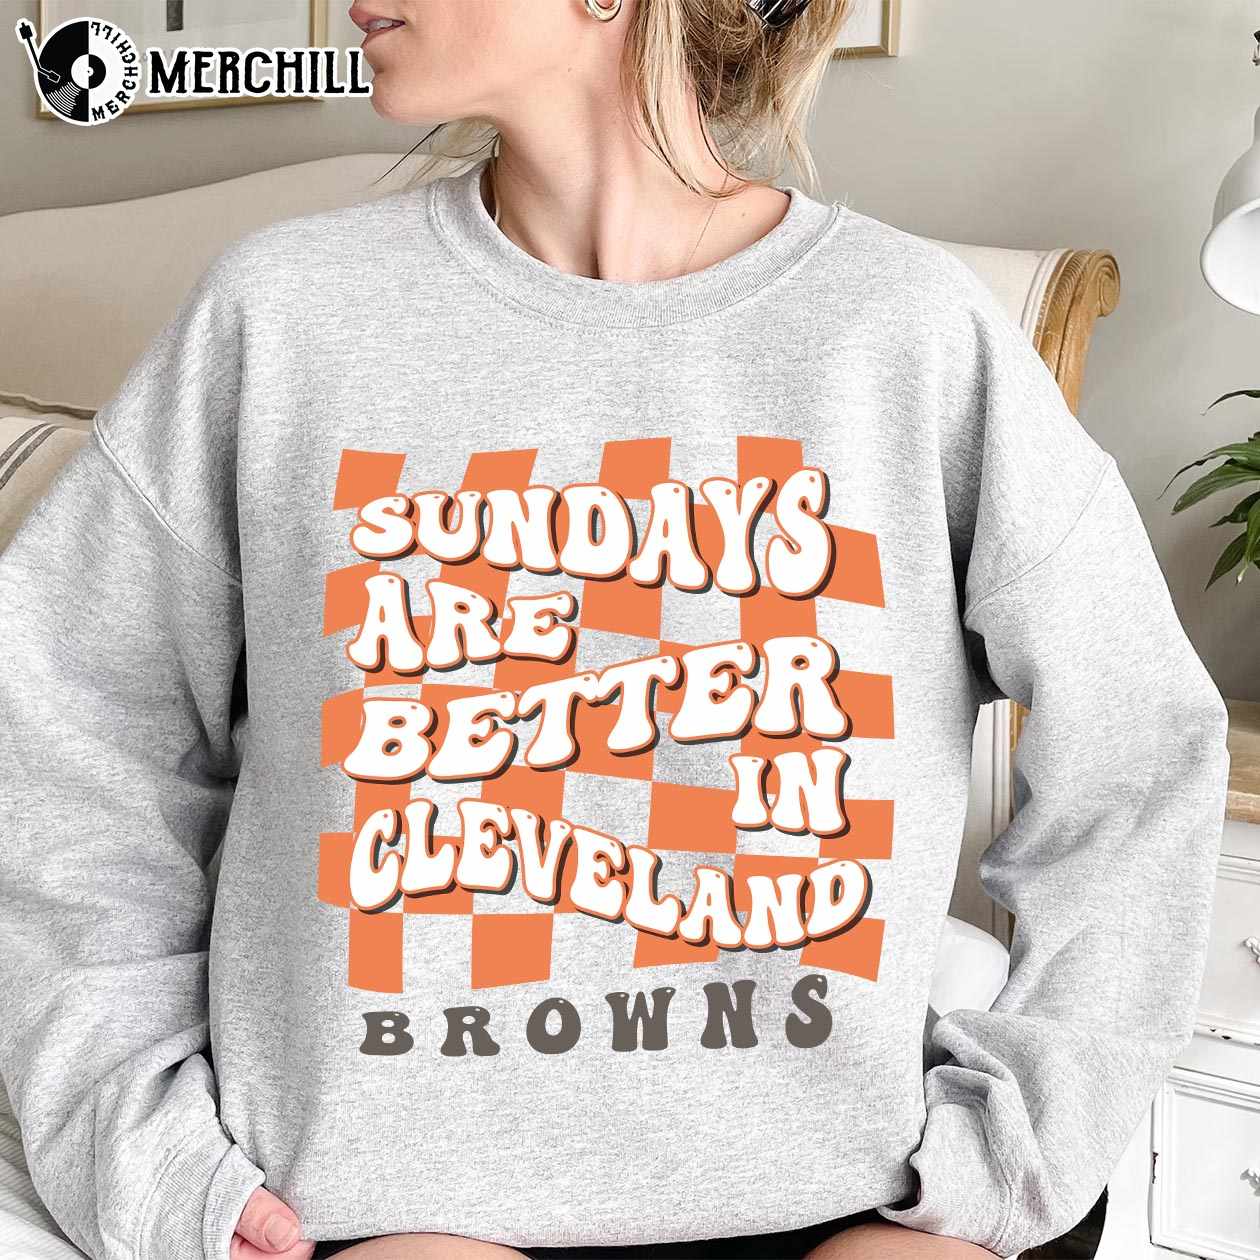 Sundays are Better in Cleveland Sweatshirt Women's Cleveland Football Shirt  - Happy Place for Music Lovers